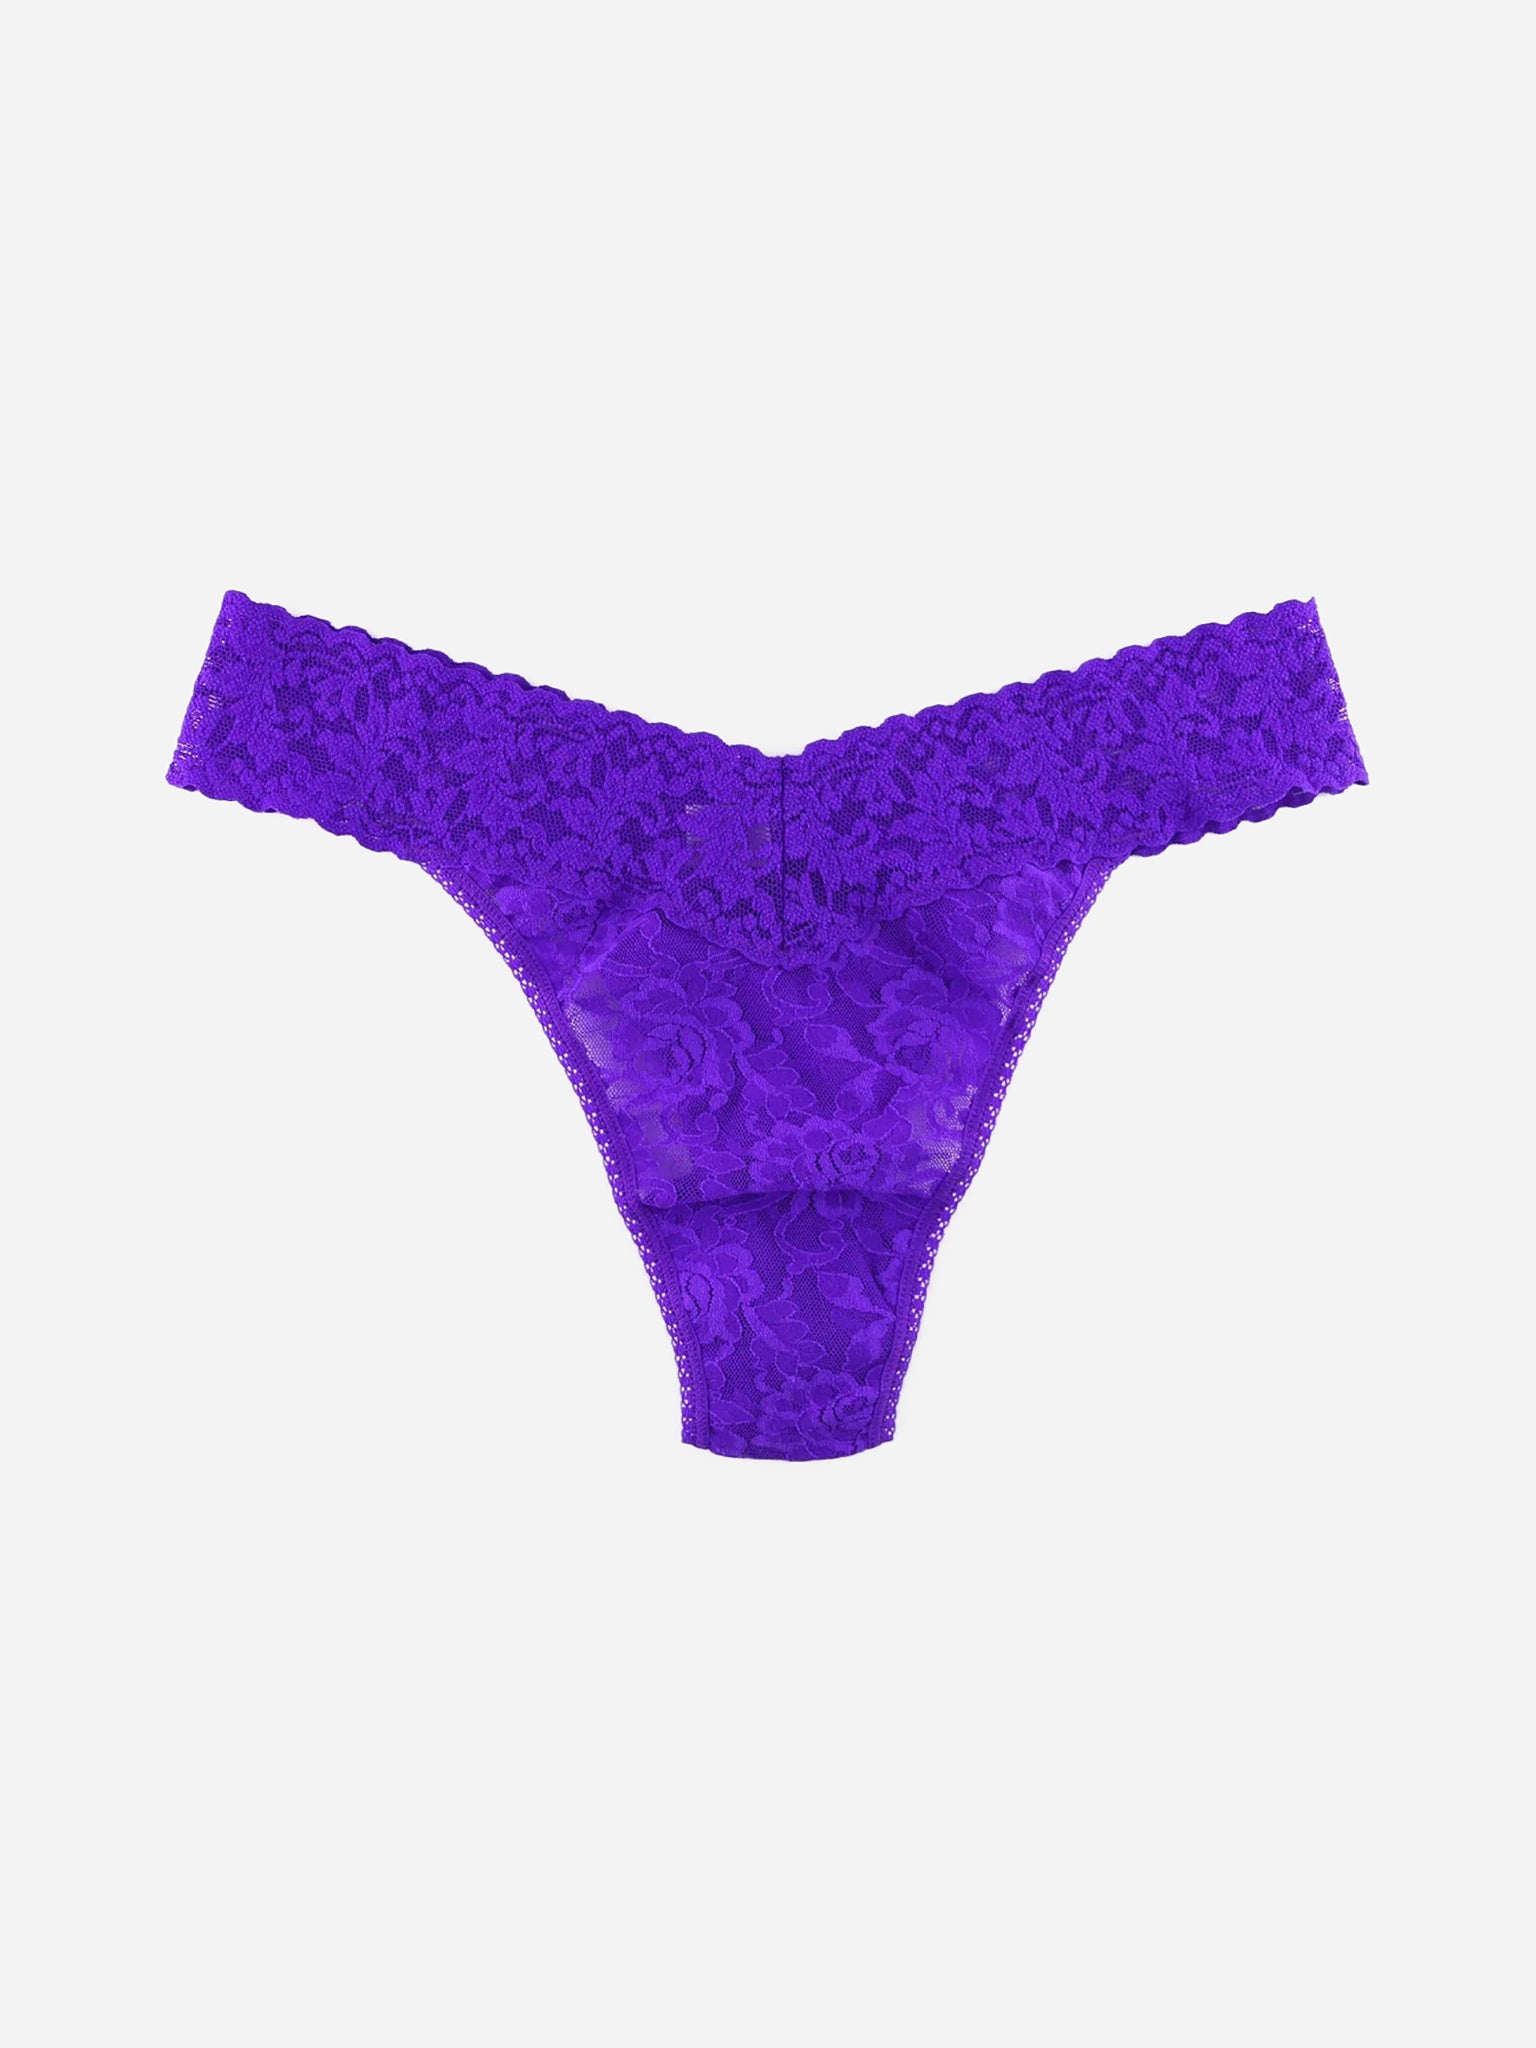 Hanky Panky Signature Lace G-String & Reviews